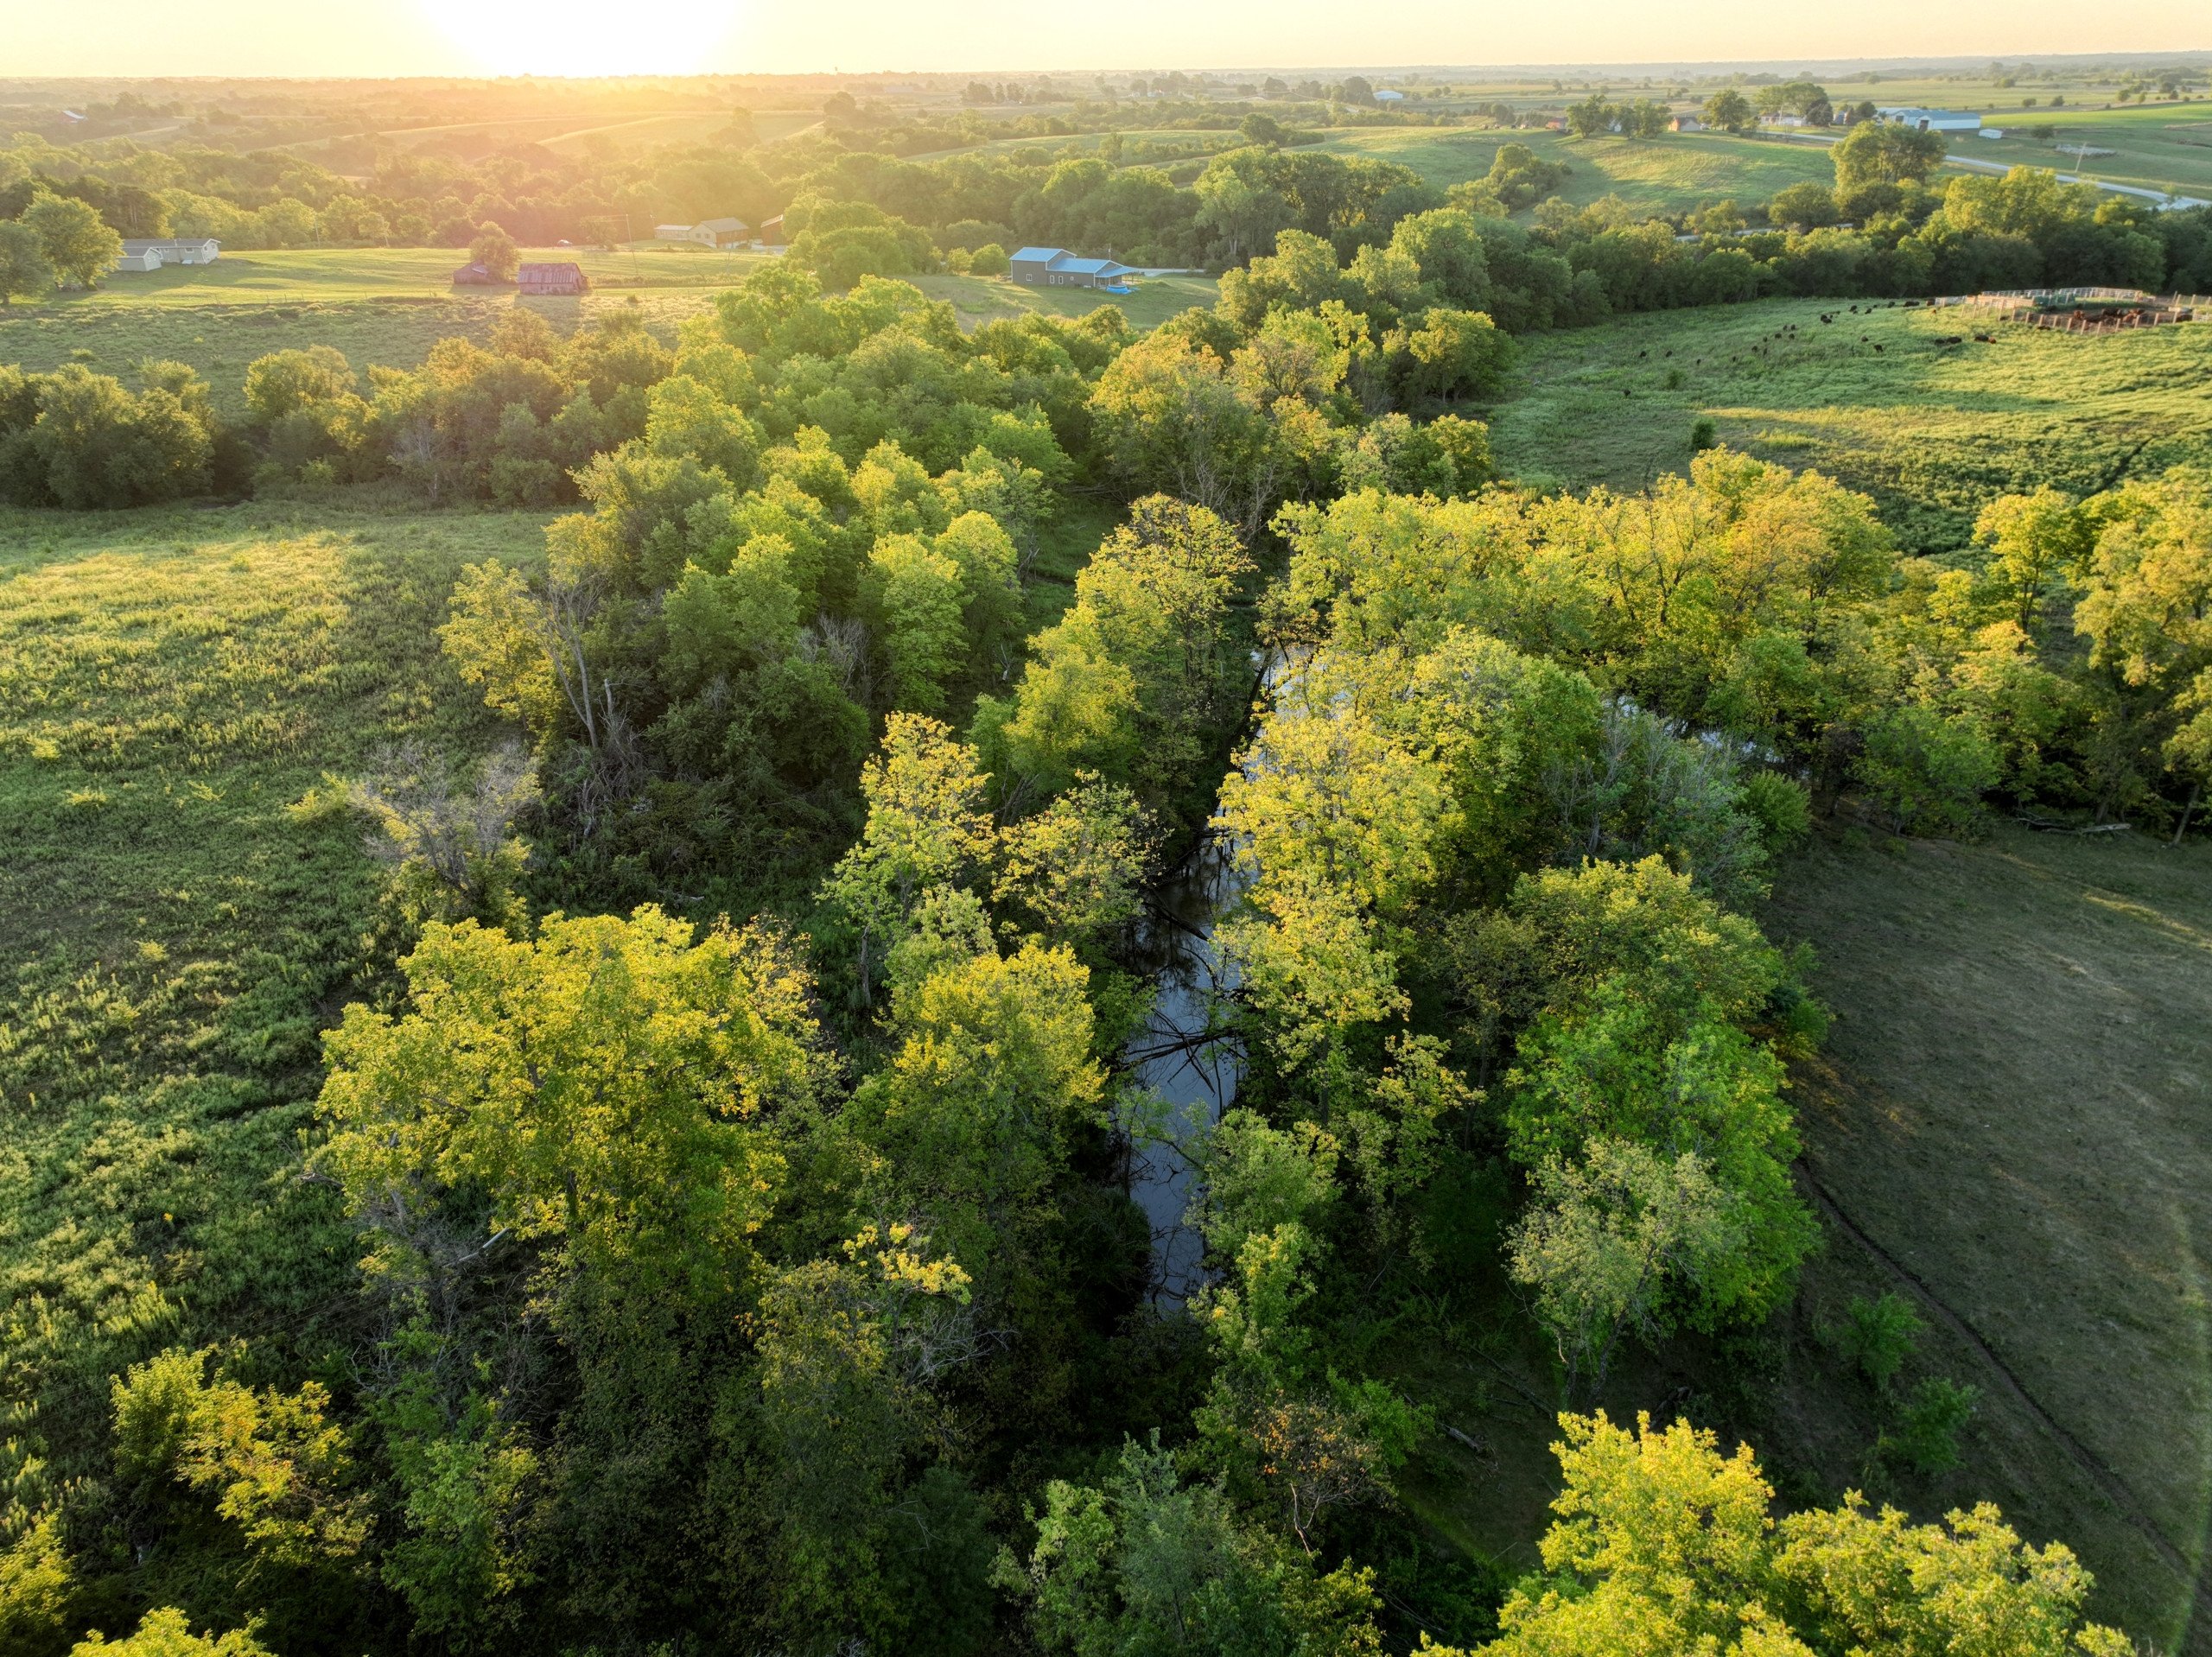 residential-land-warren-county-iowa-148-acres-listing-number-16390-9-0.jpg